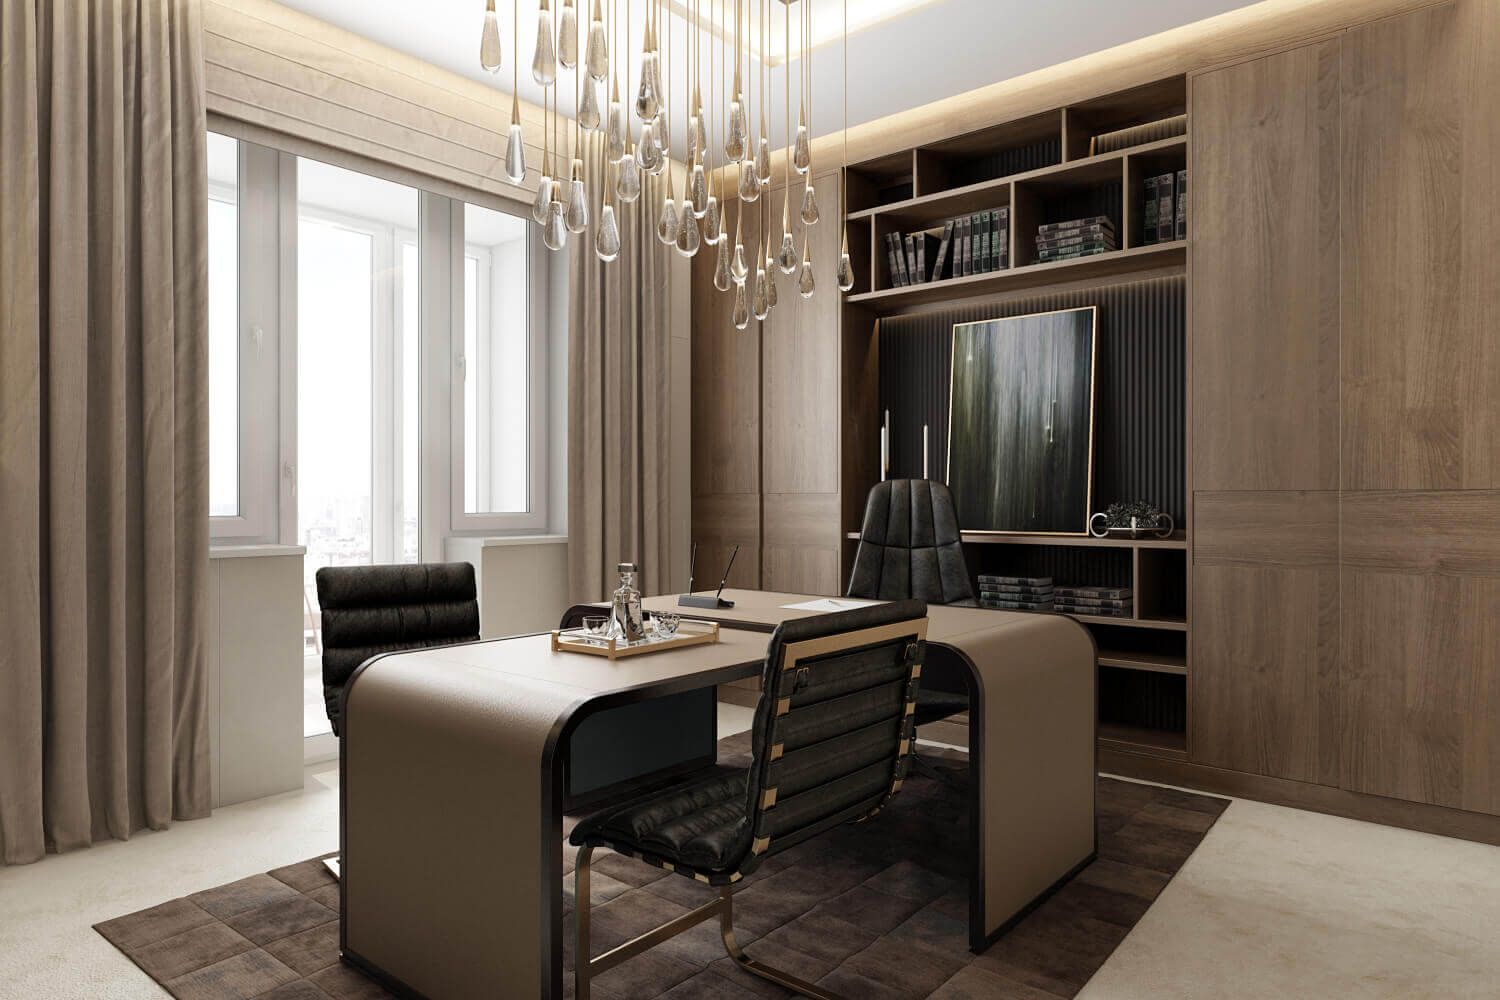 Professional 3D Architectural Renderings To Highlight An Impressive Office Interior View27